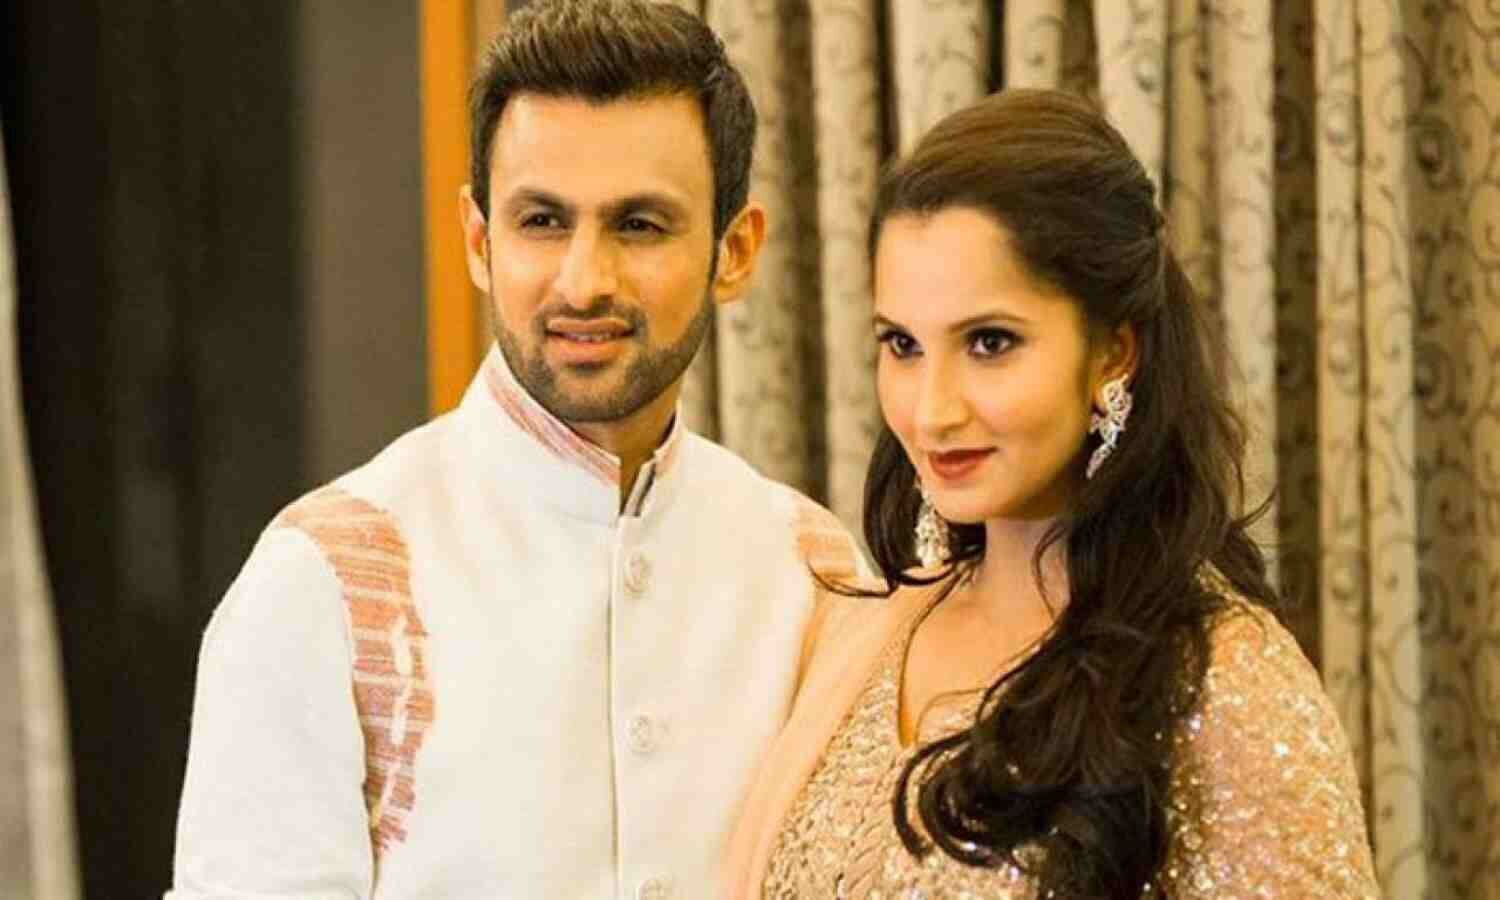 Sania-Shoaib Divorce: Shoaib Malik spoke on the news of divorce from Sania Mirza, told the truth in gestures!